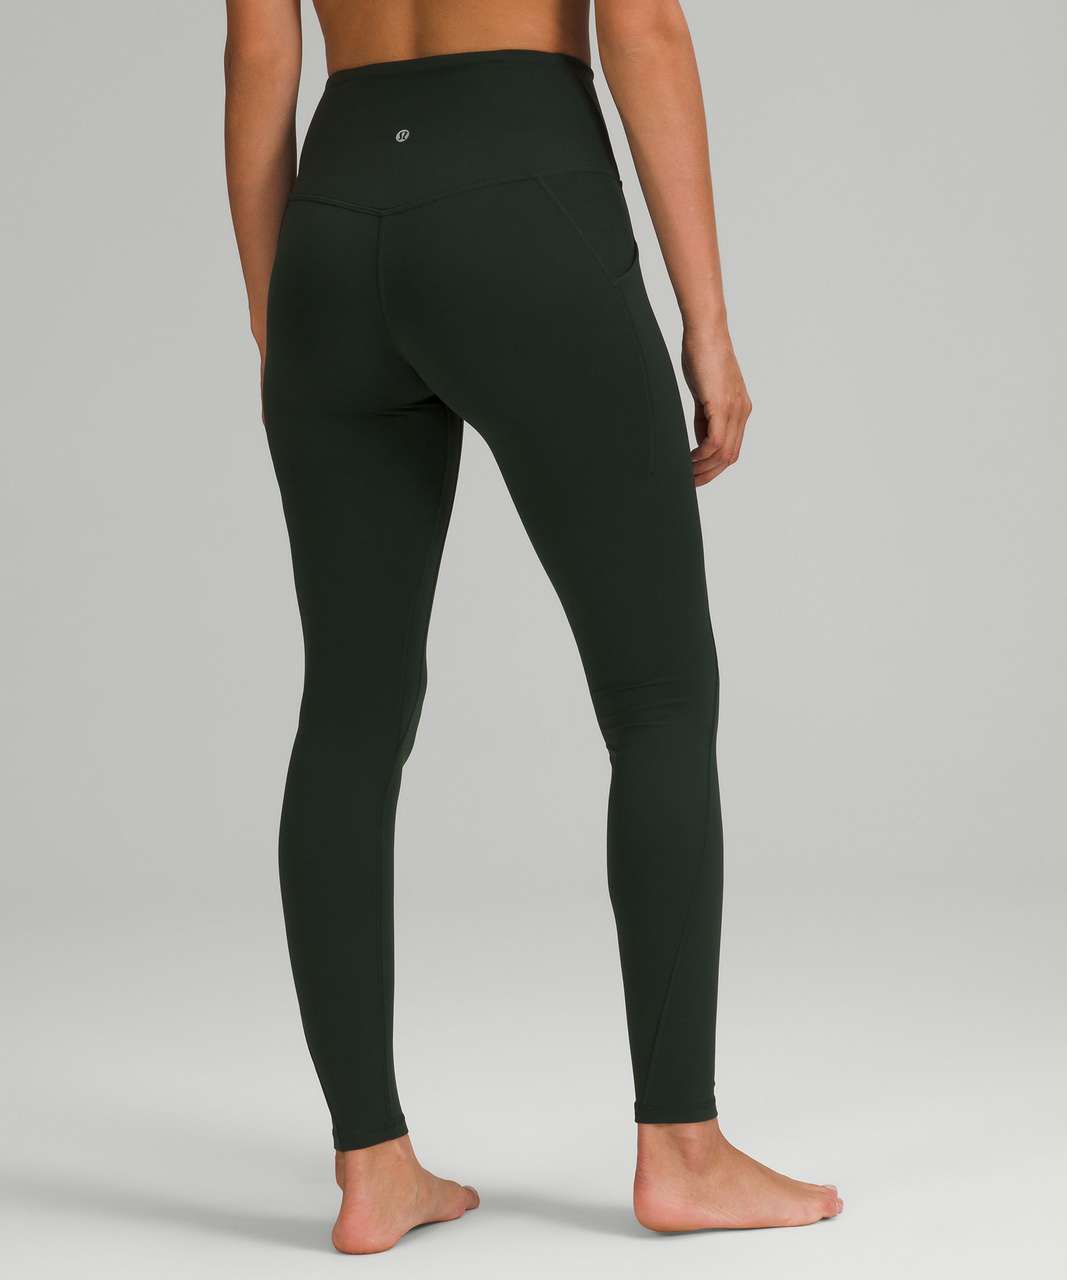 Lululemon Align High-Rise Pant with Pockets 28 - Rainforest Green